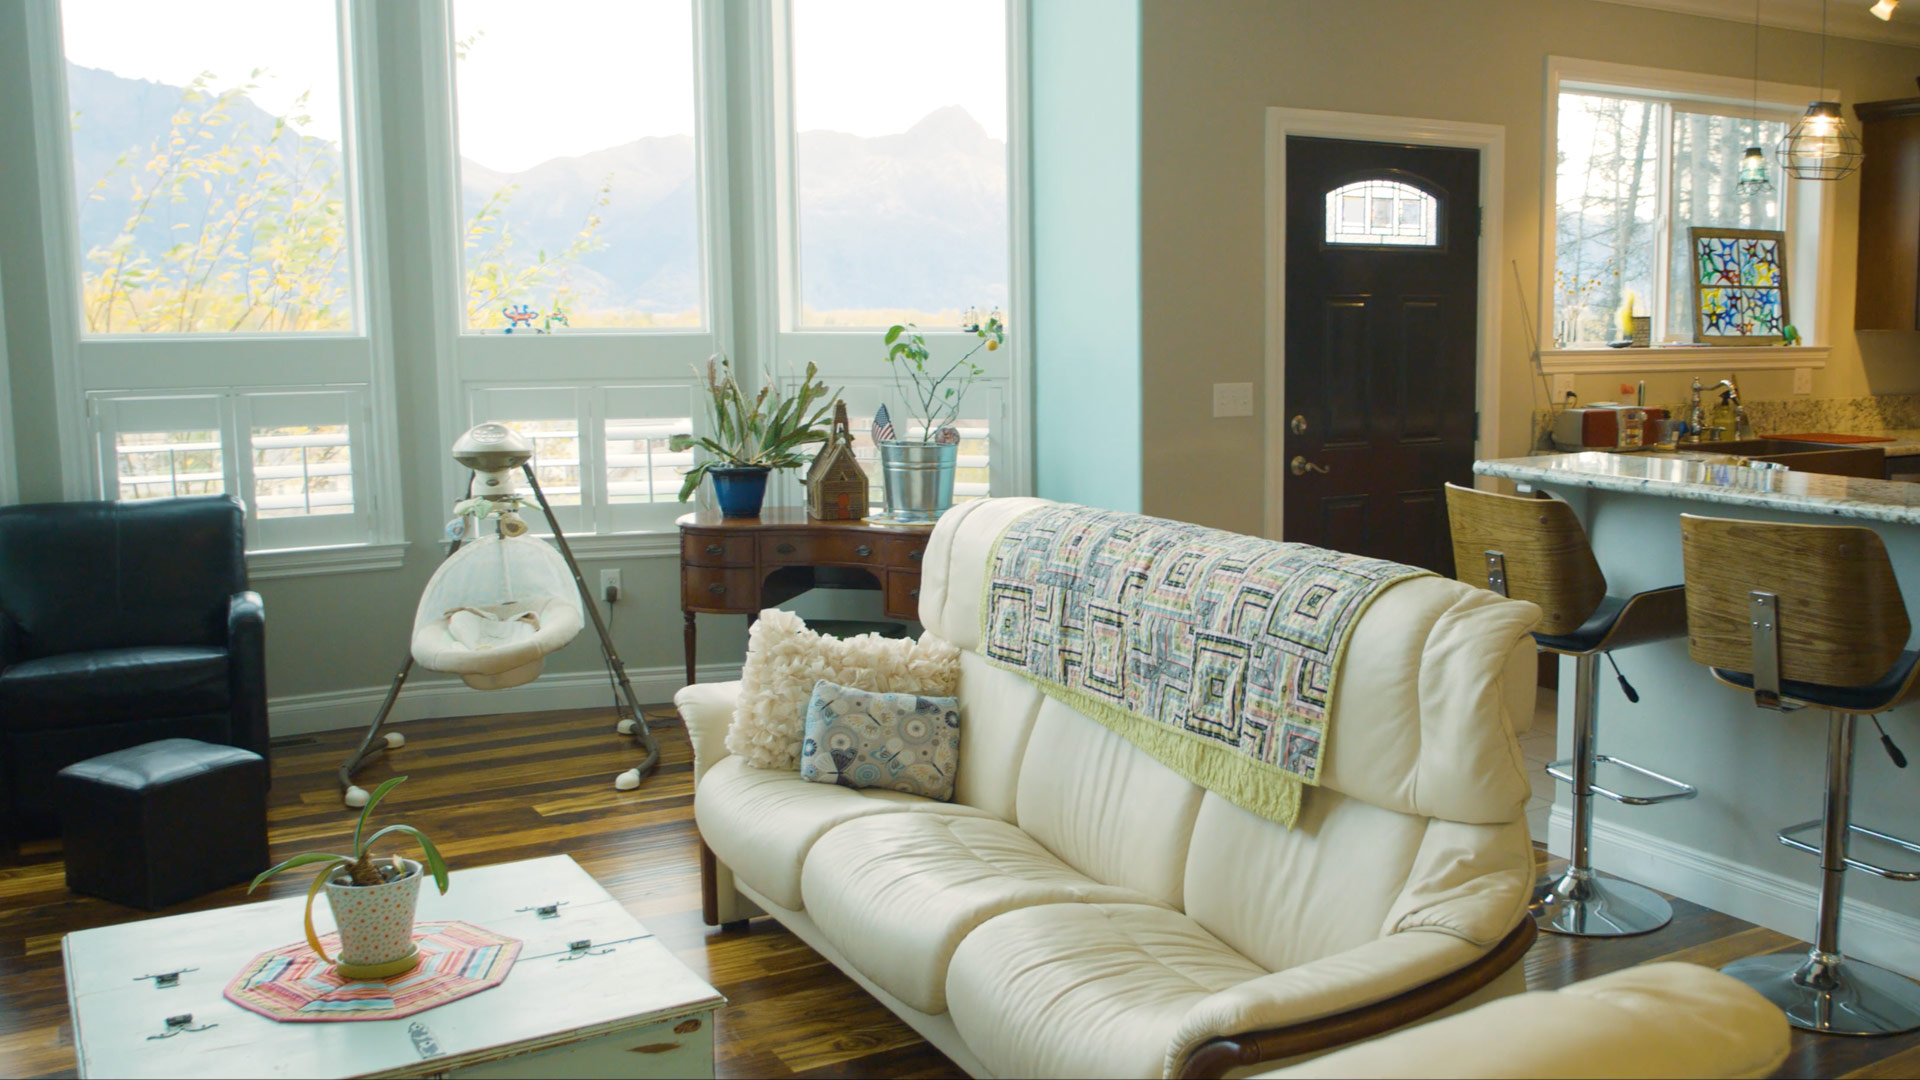 Living room of a house with furniture and large windows looking out to mountains